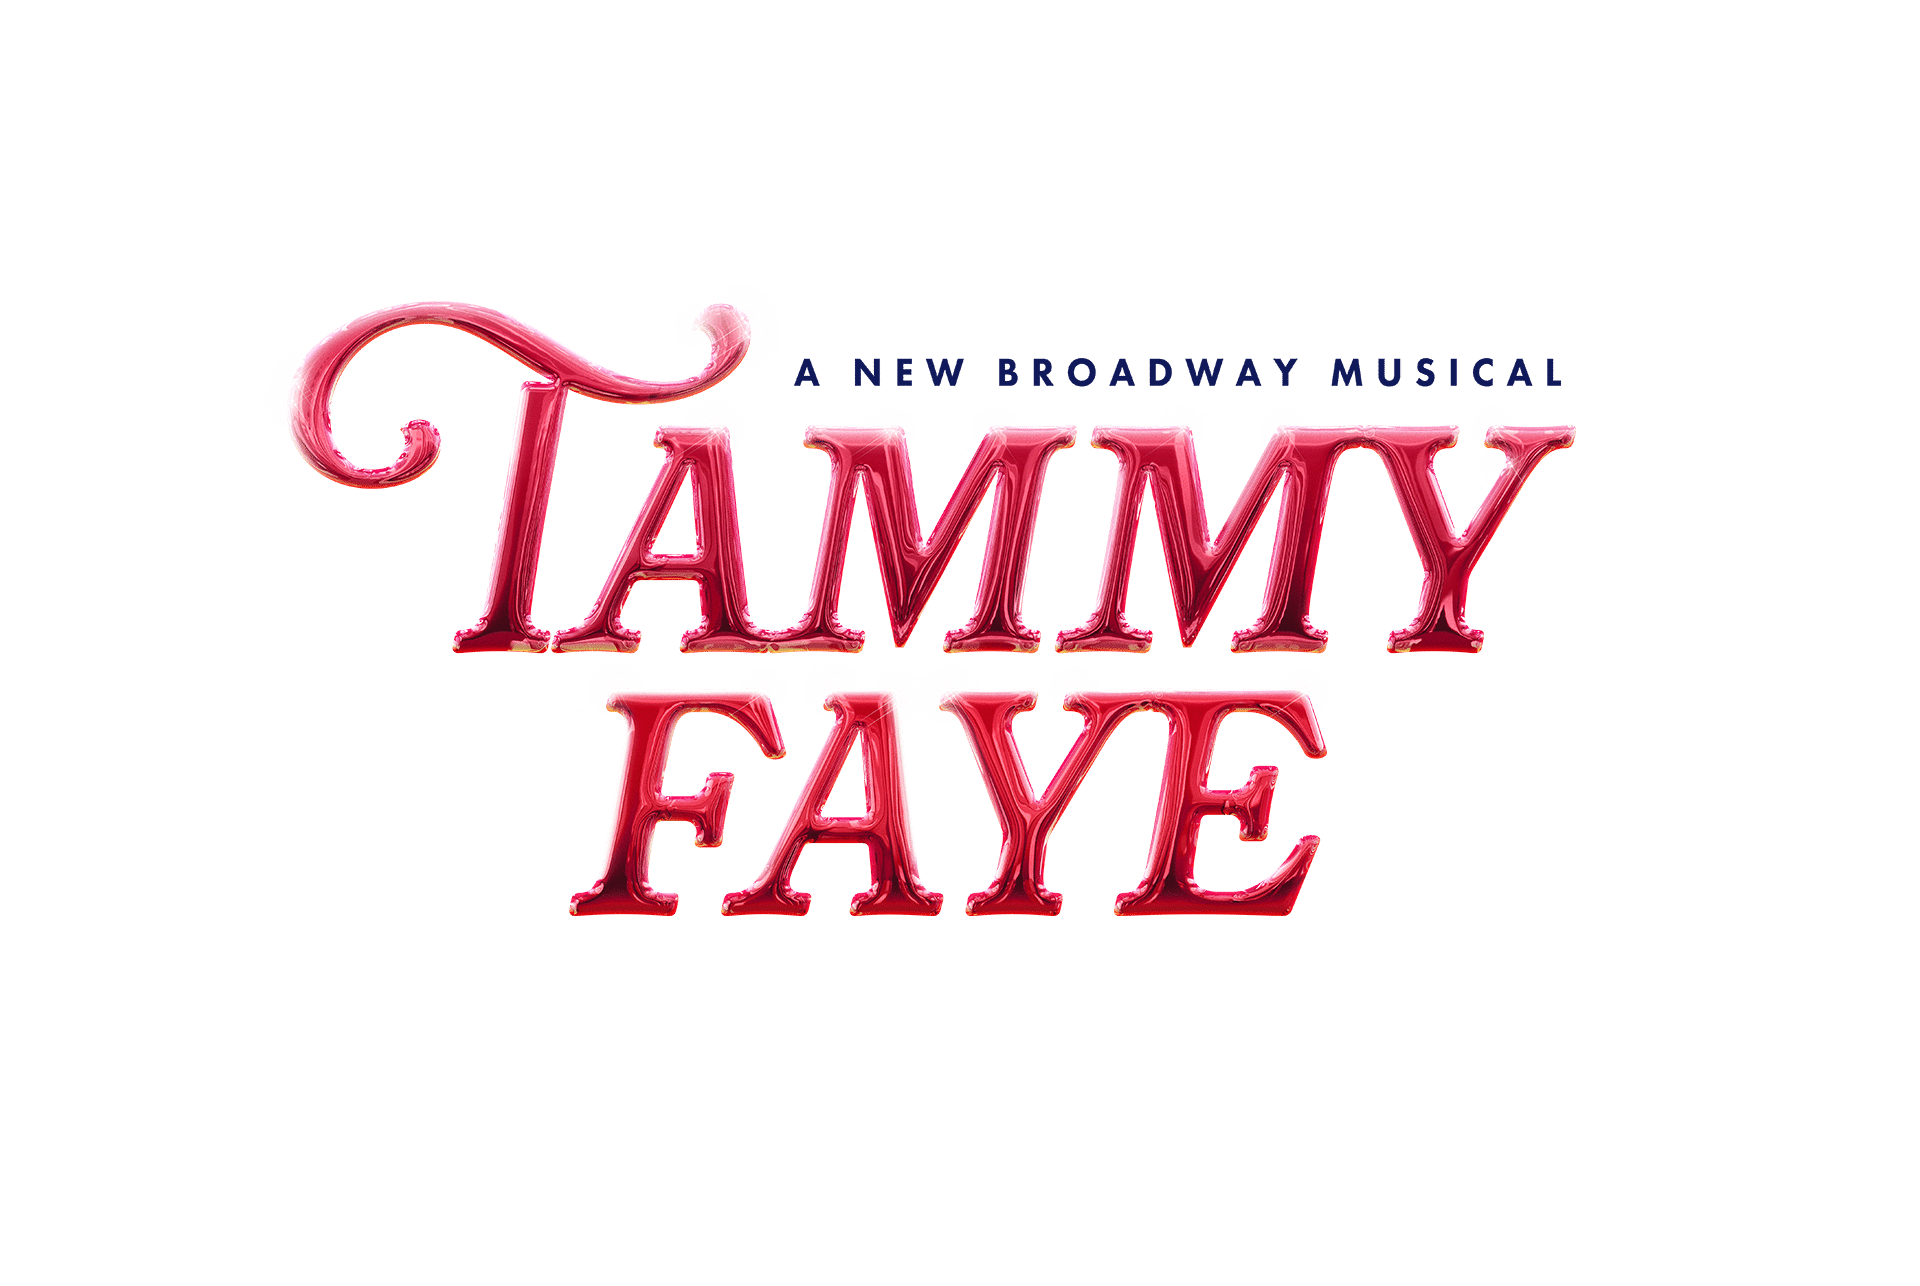 Tammy Faye: A New Musical